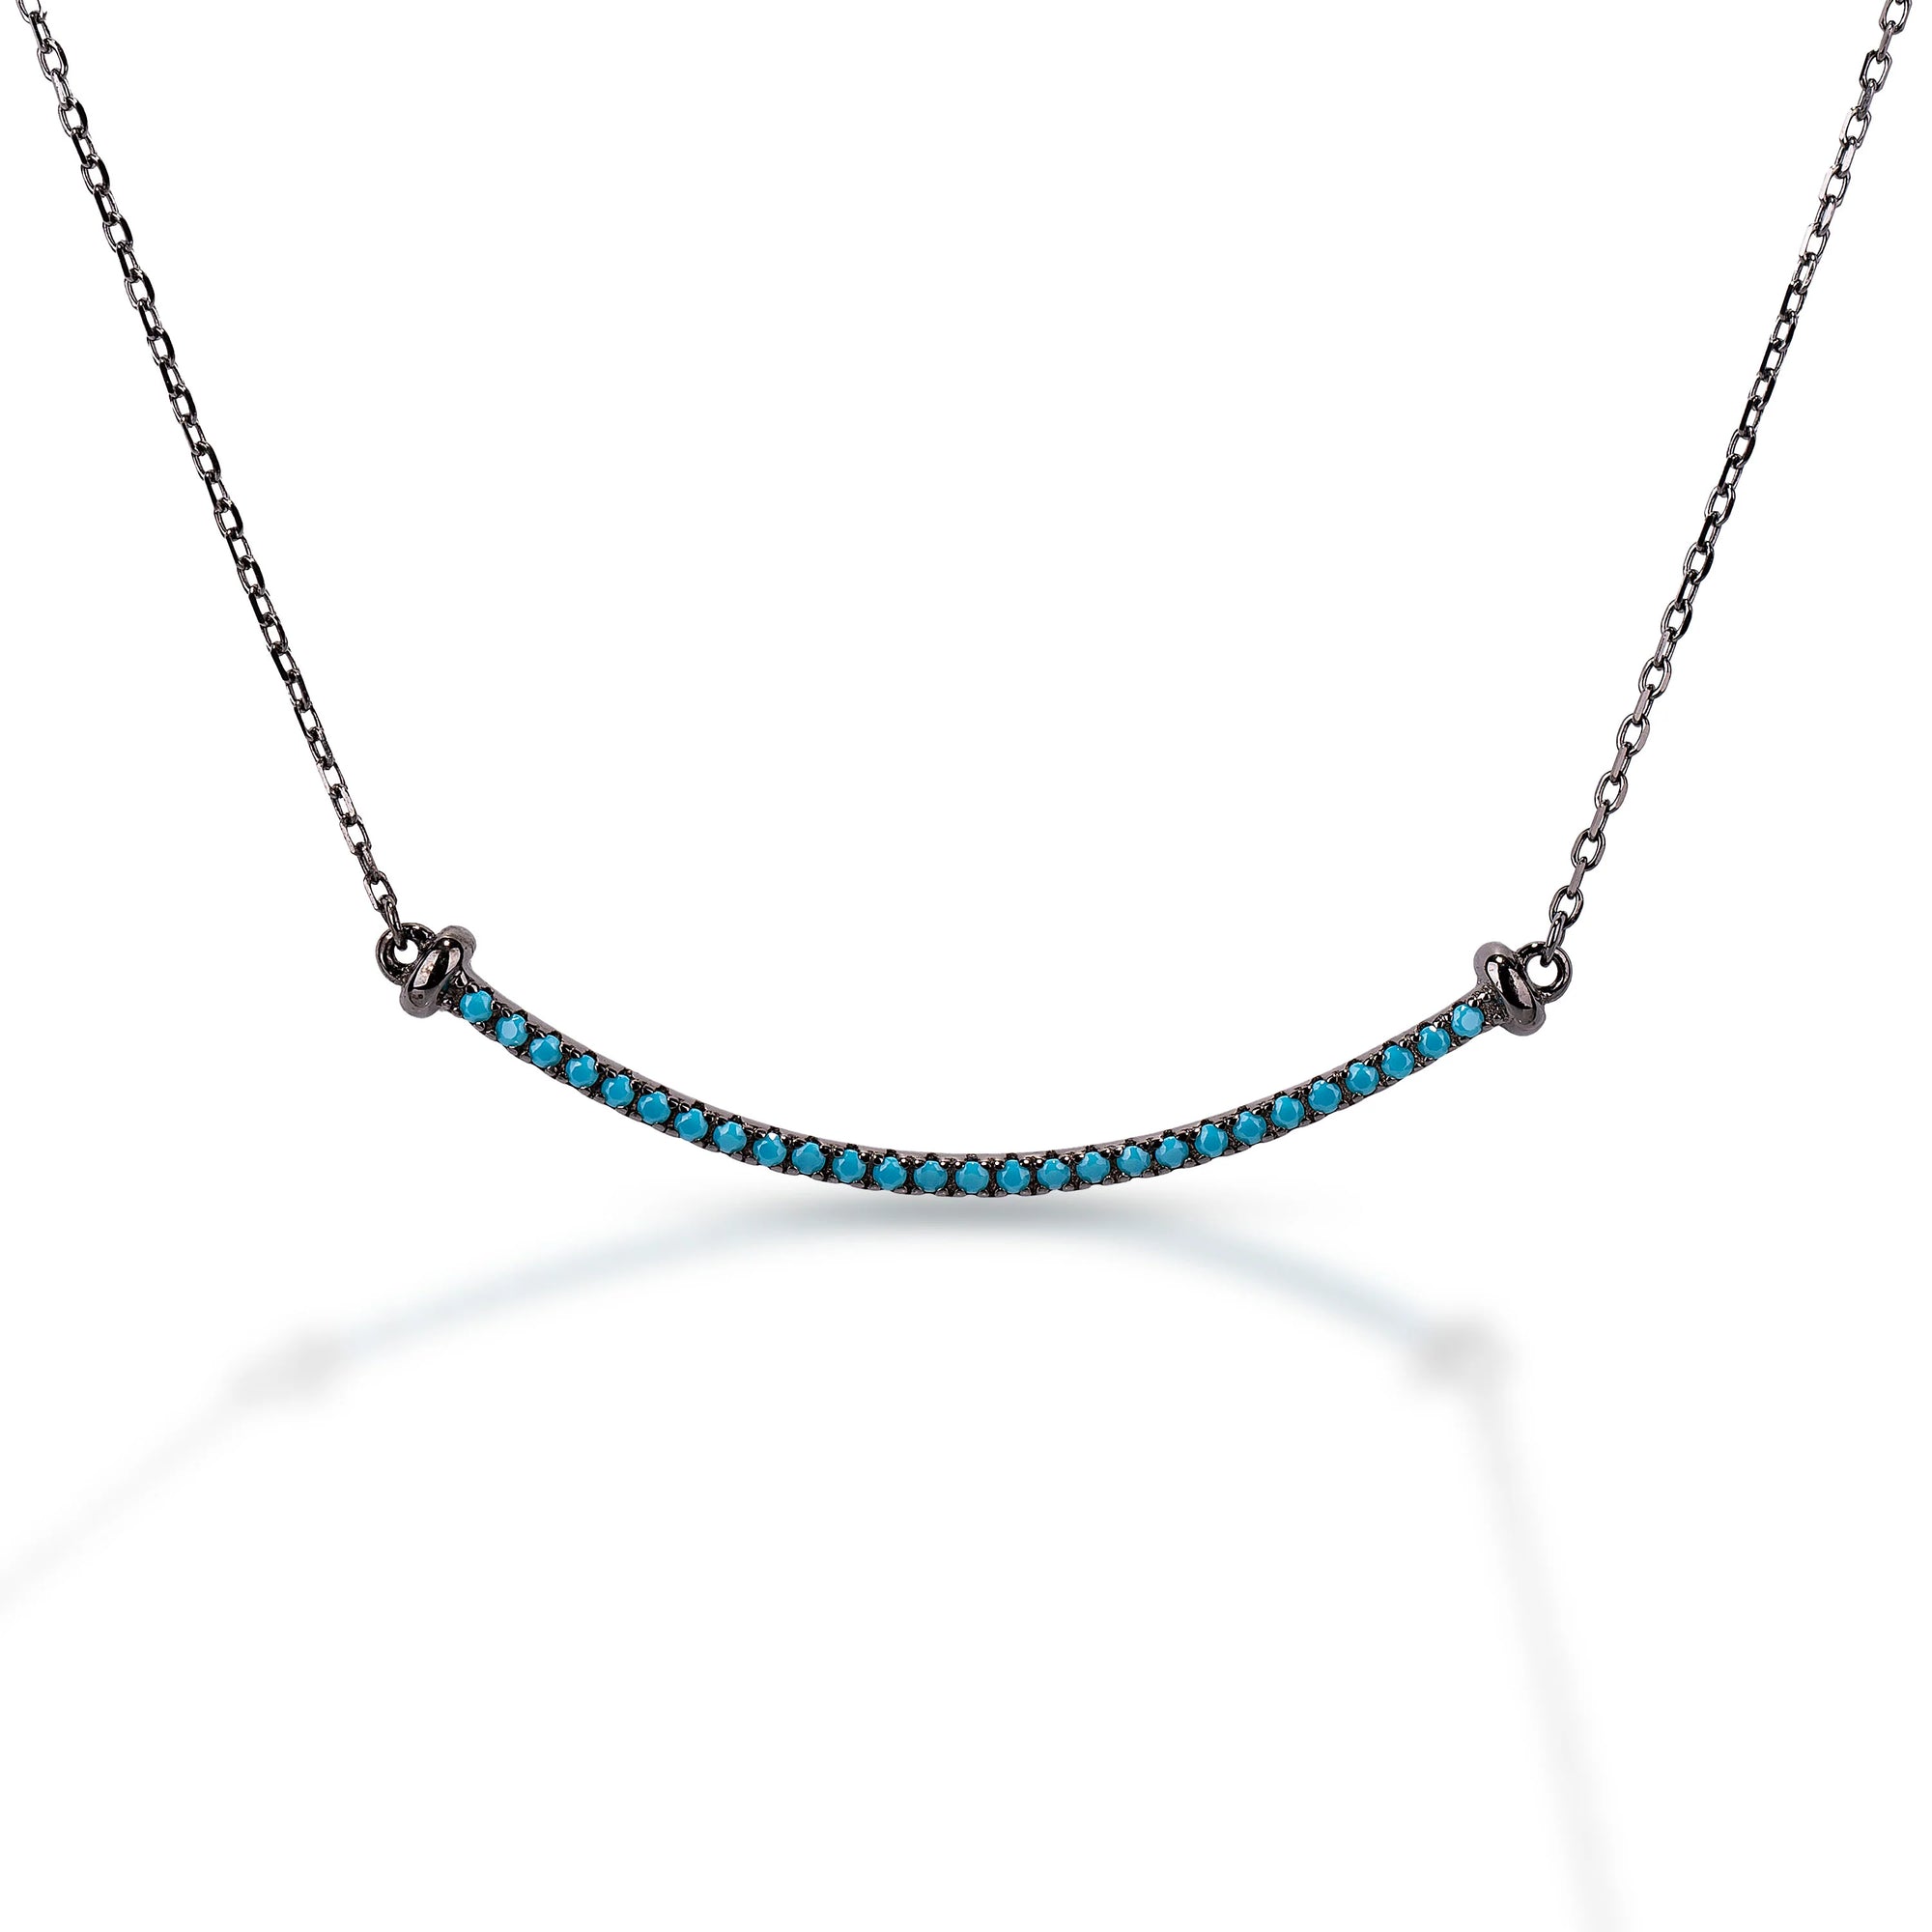 Kelly Herd Black Rhodium Plated Line Turquoise Stone Necklace STYLE KHSBGP01103TQ